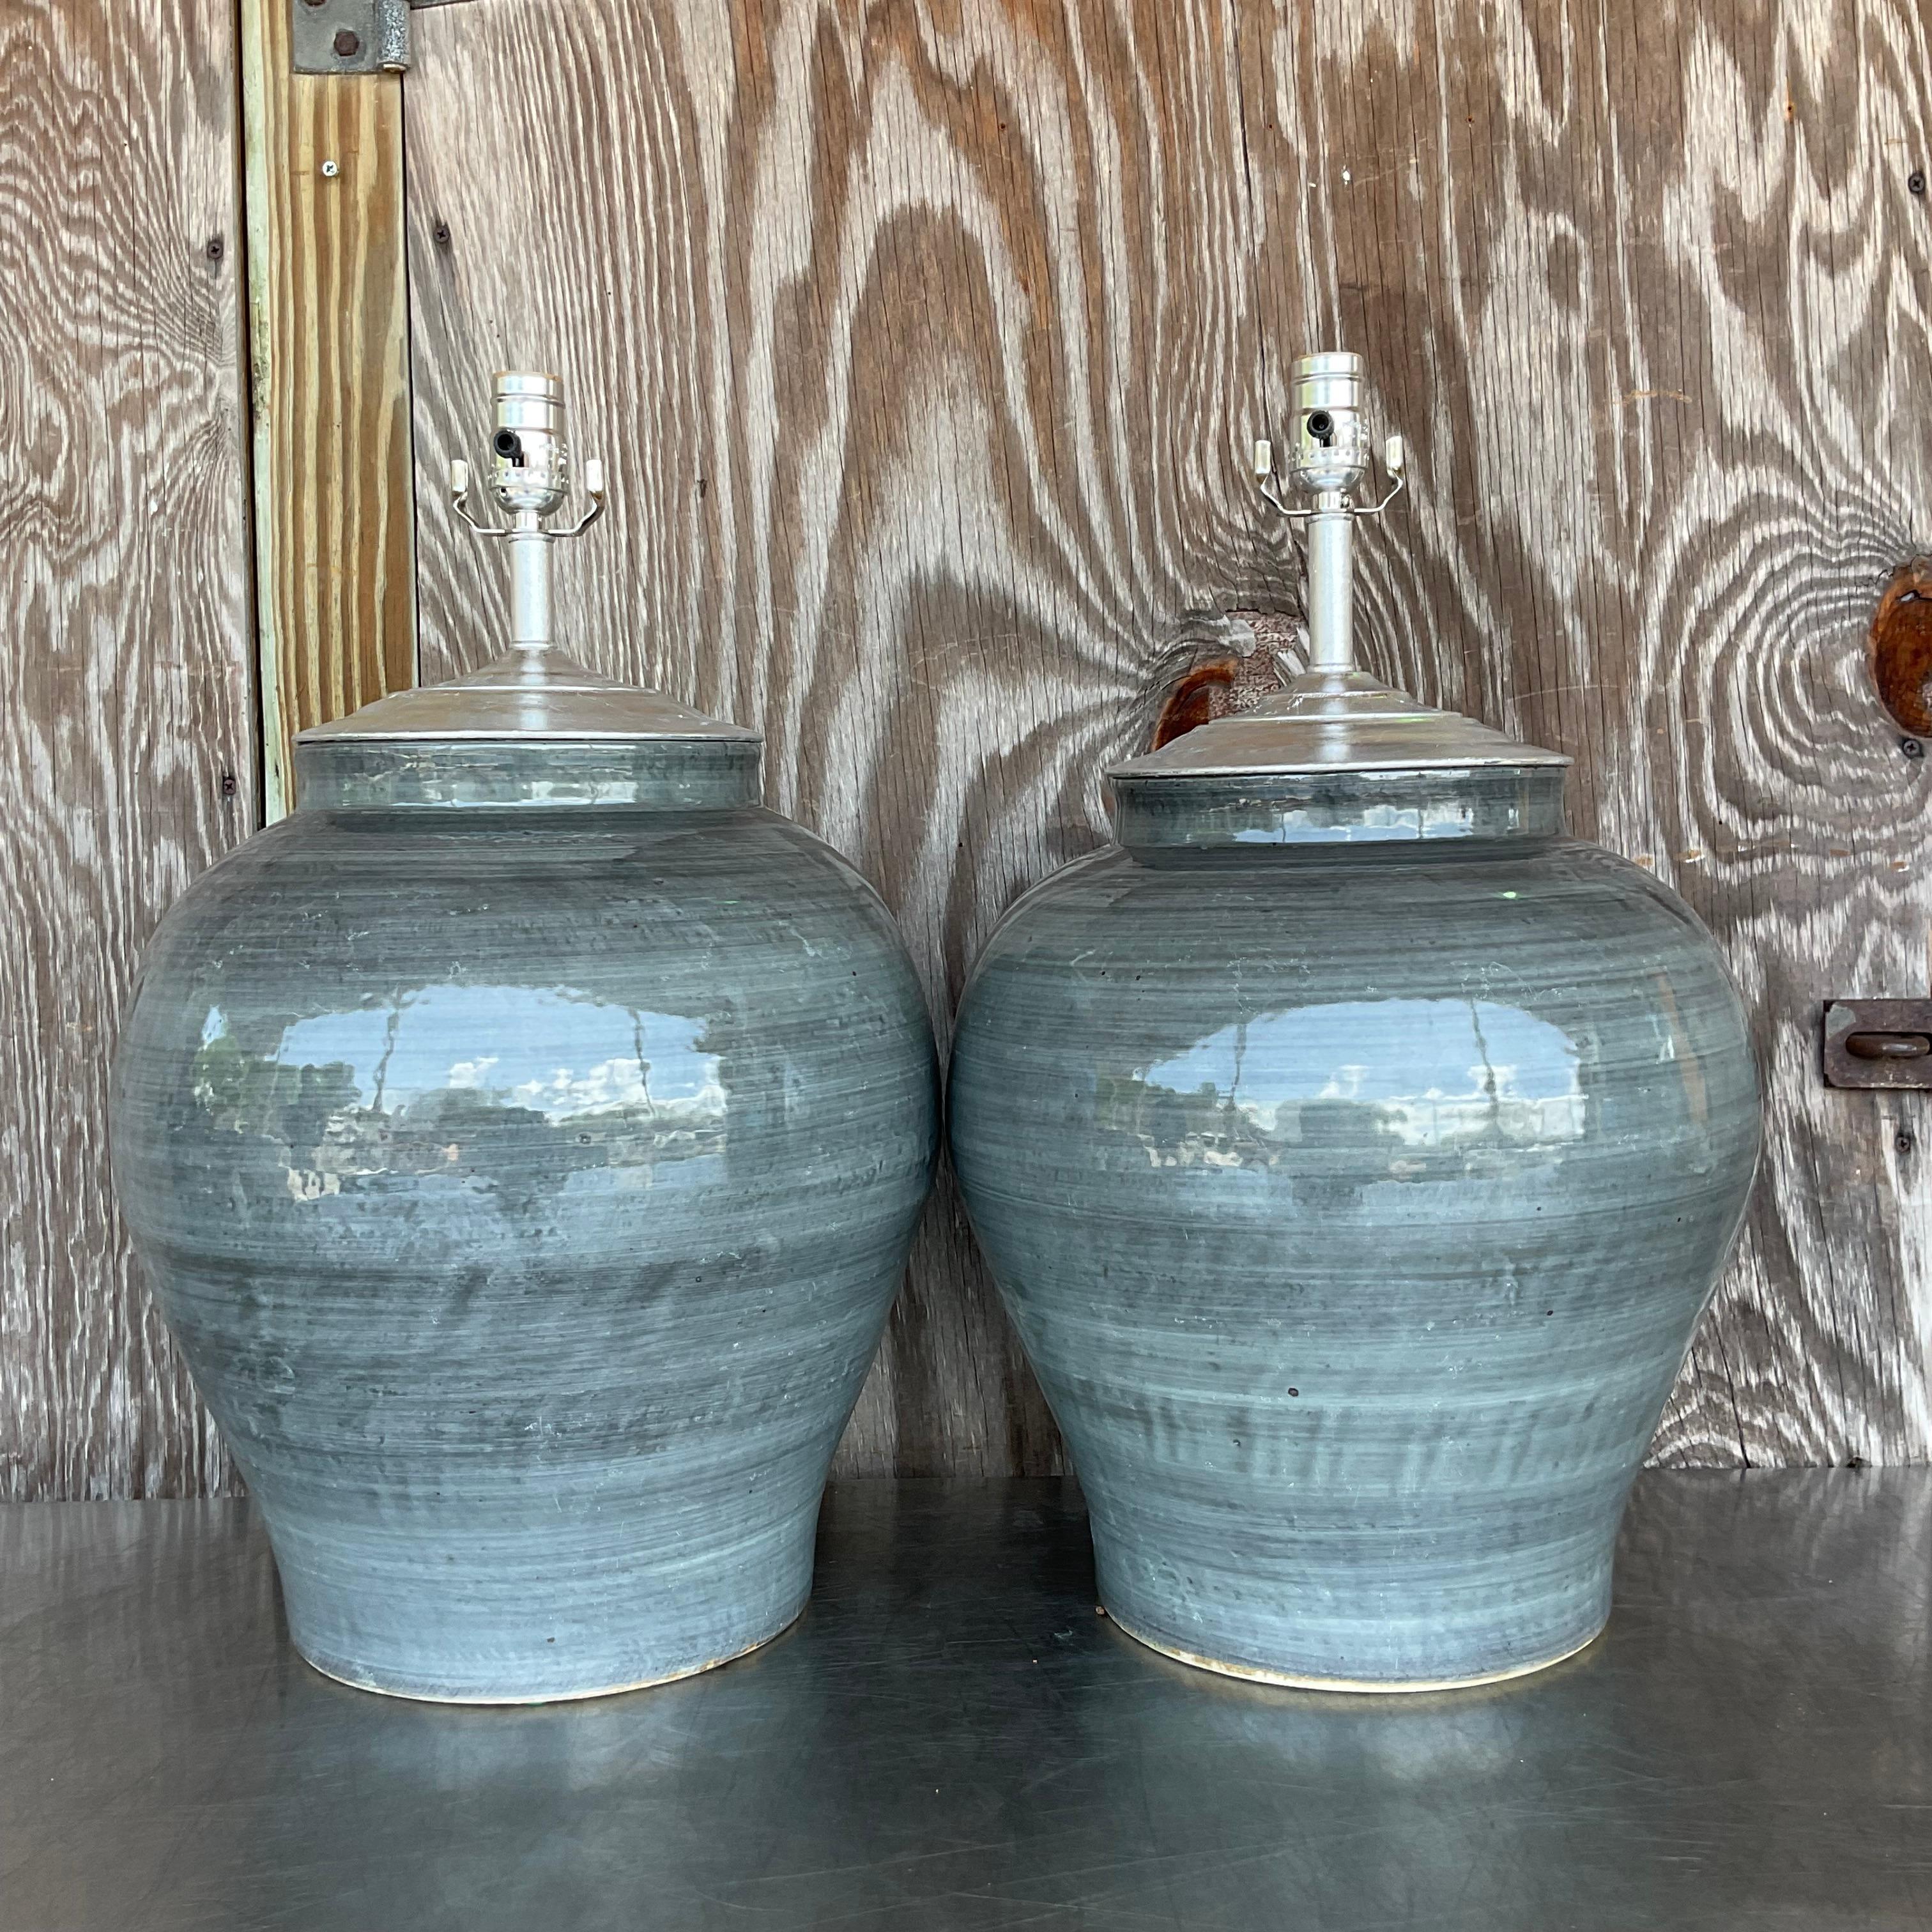 Illuminate your home with our Vintage Boho Glazed Ceramic Table Lamps. Sold as a pair, these American-curated lamps showcase boho-inspired design, featuring beautifully glazed ceramic bases that bring warmth and artistic flair to your living space